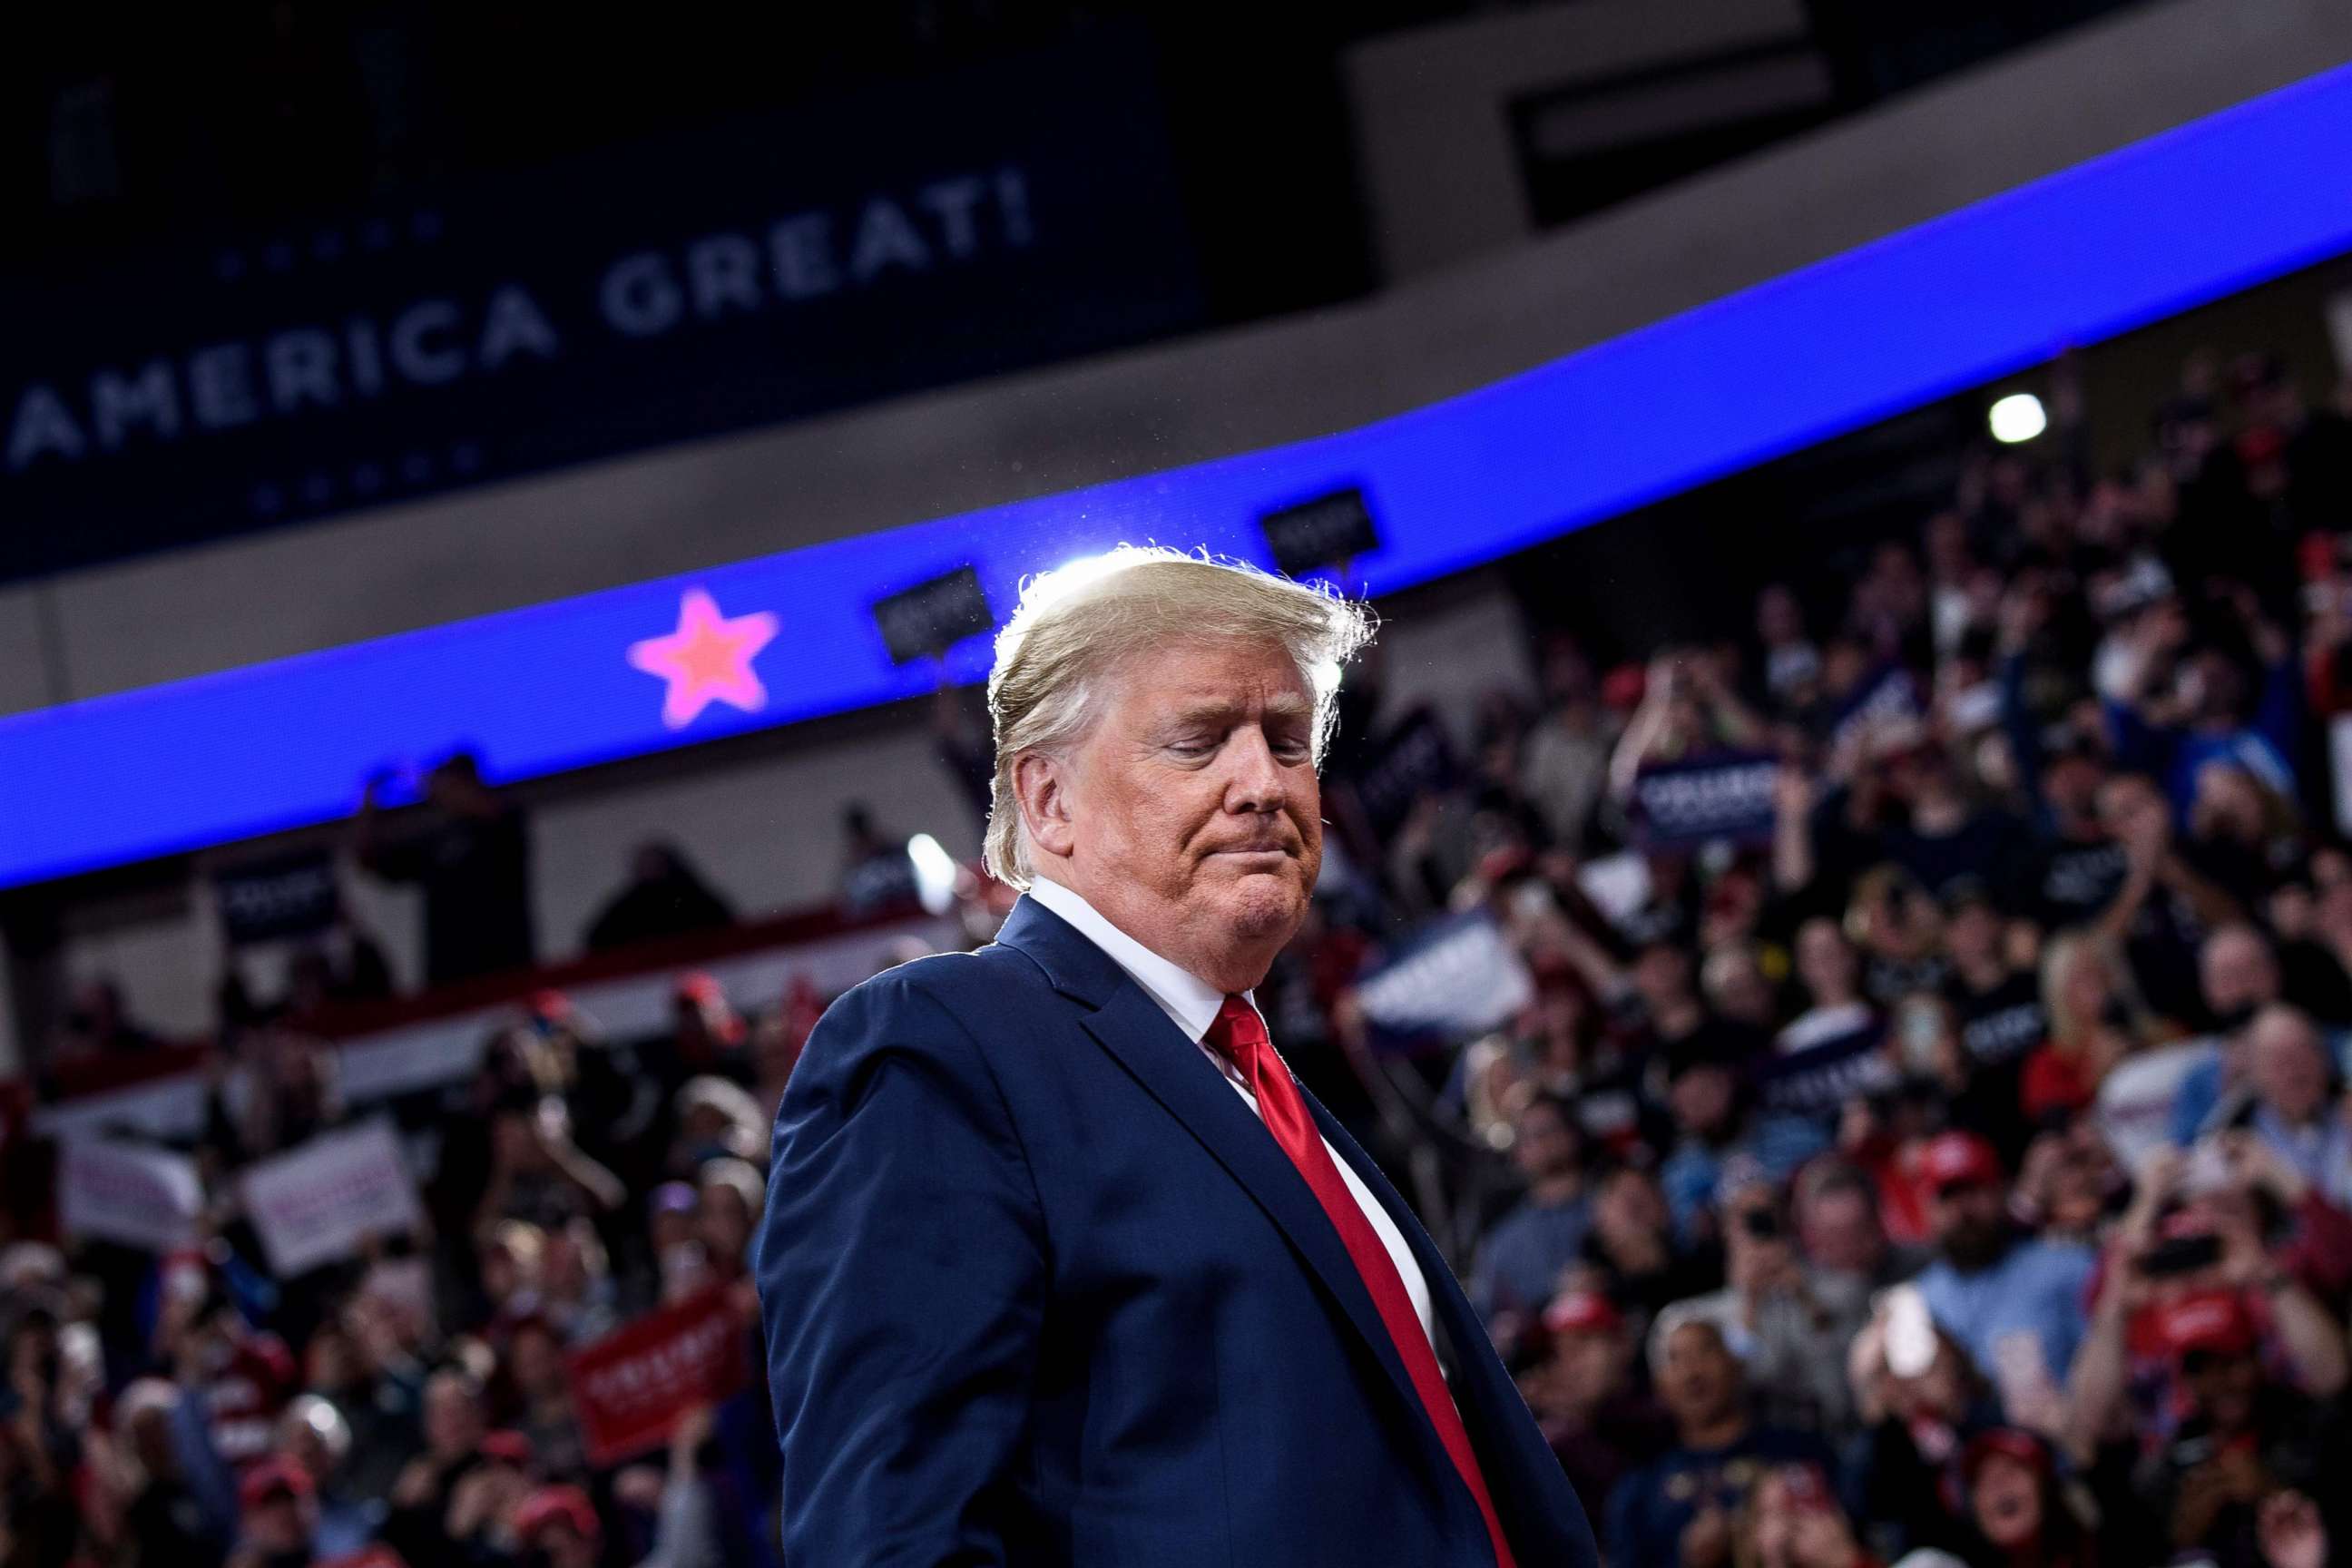 PHOTO: President Donald Trump arrives for a Keep America Great rally at the Giant Center in Hershey, Pennsylvania, Dec. 10, 2019.